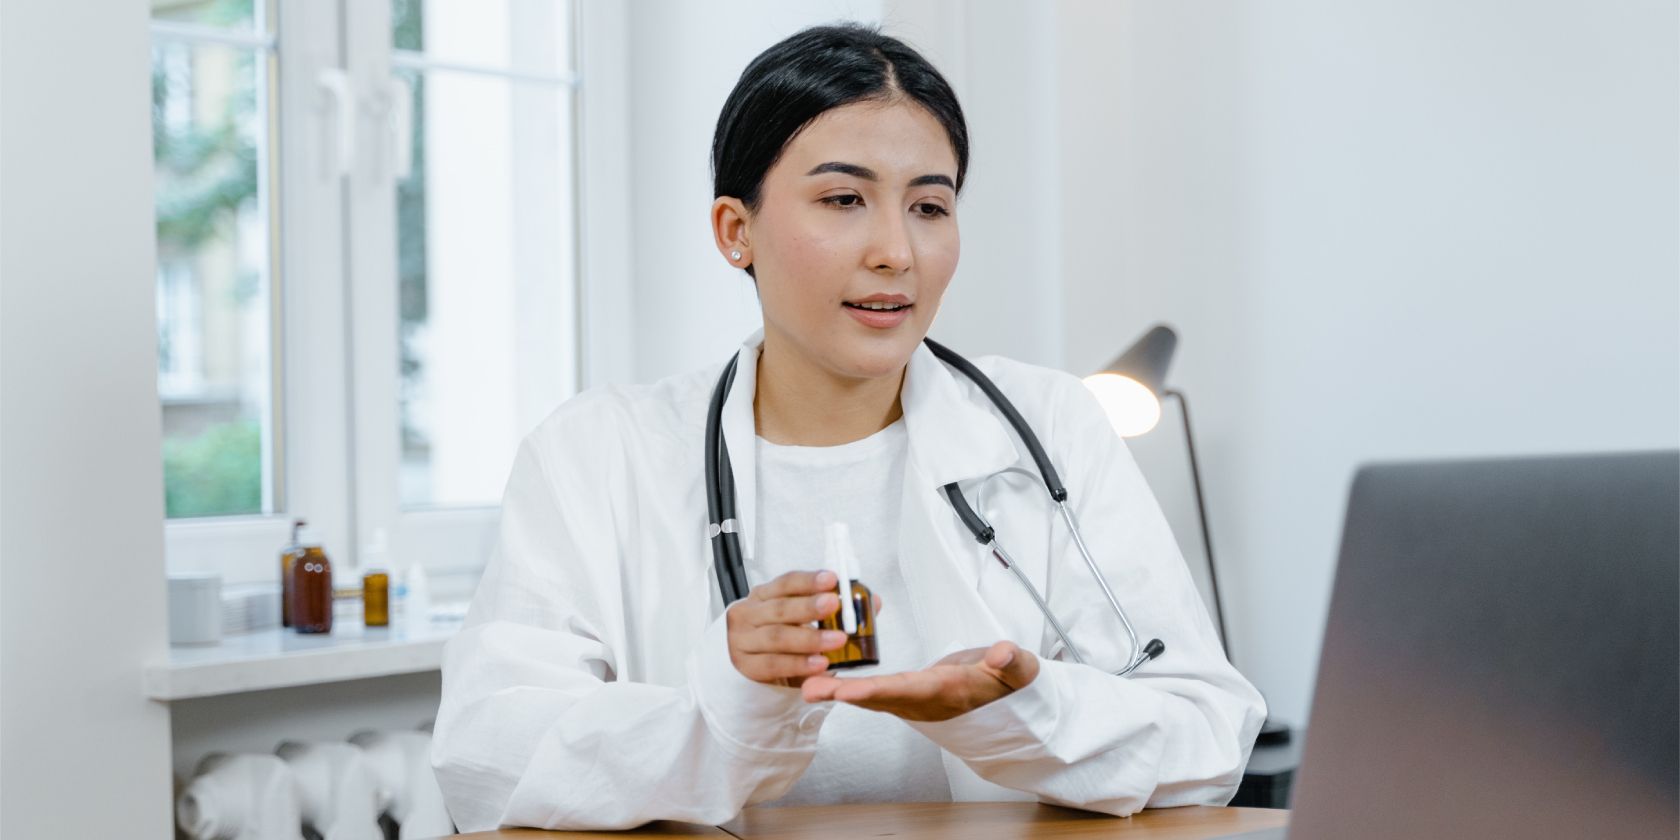 Woman doctor holding a medicine bottle in front of computer